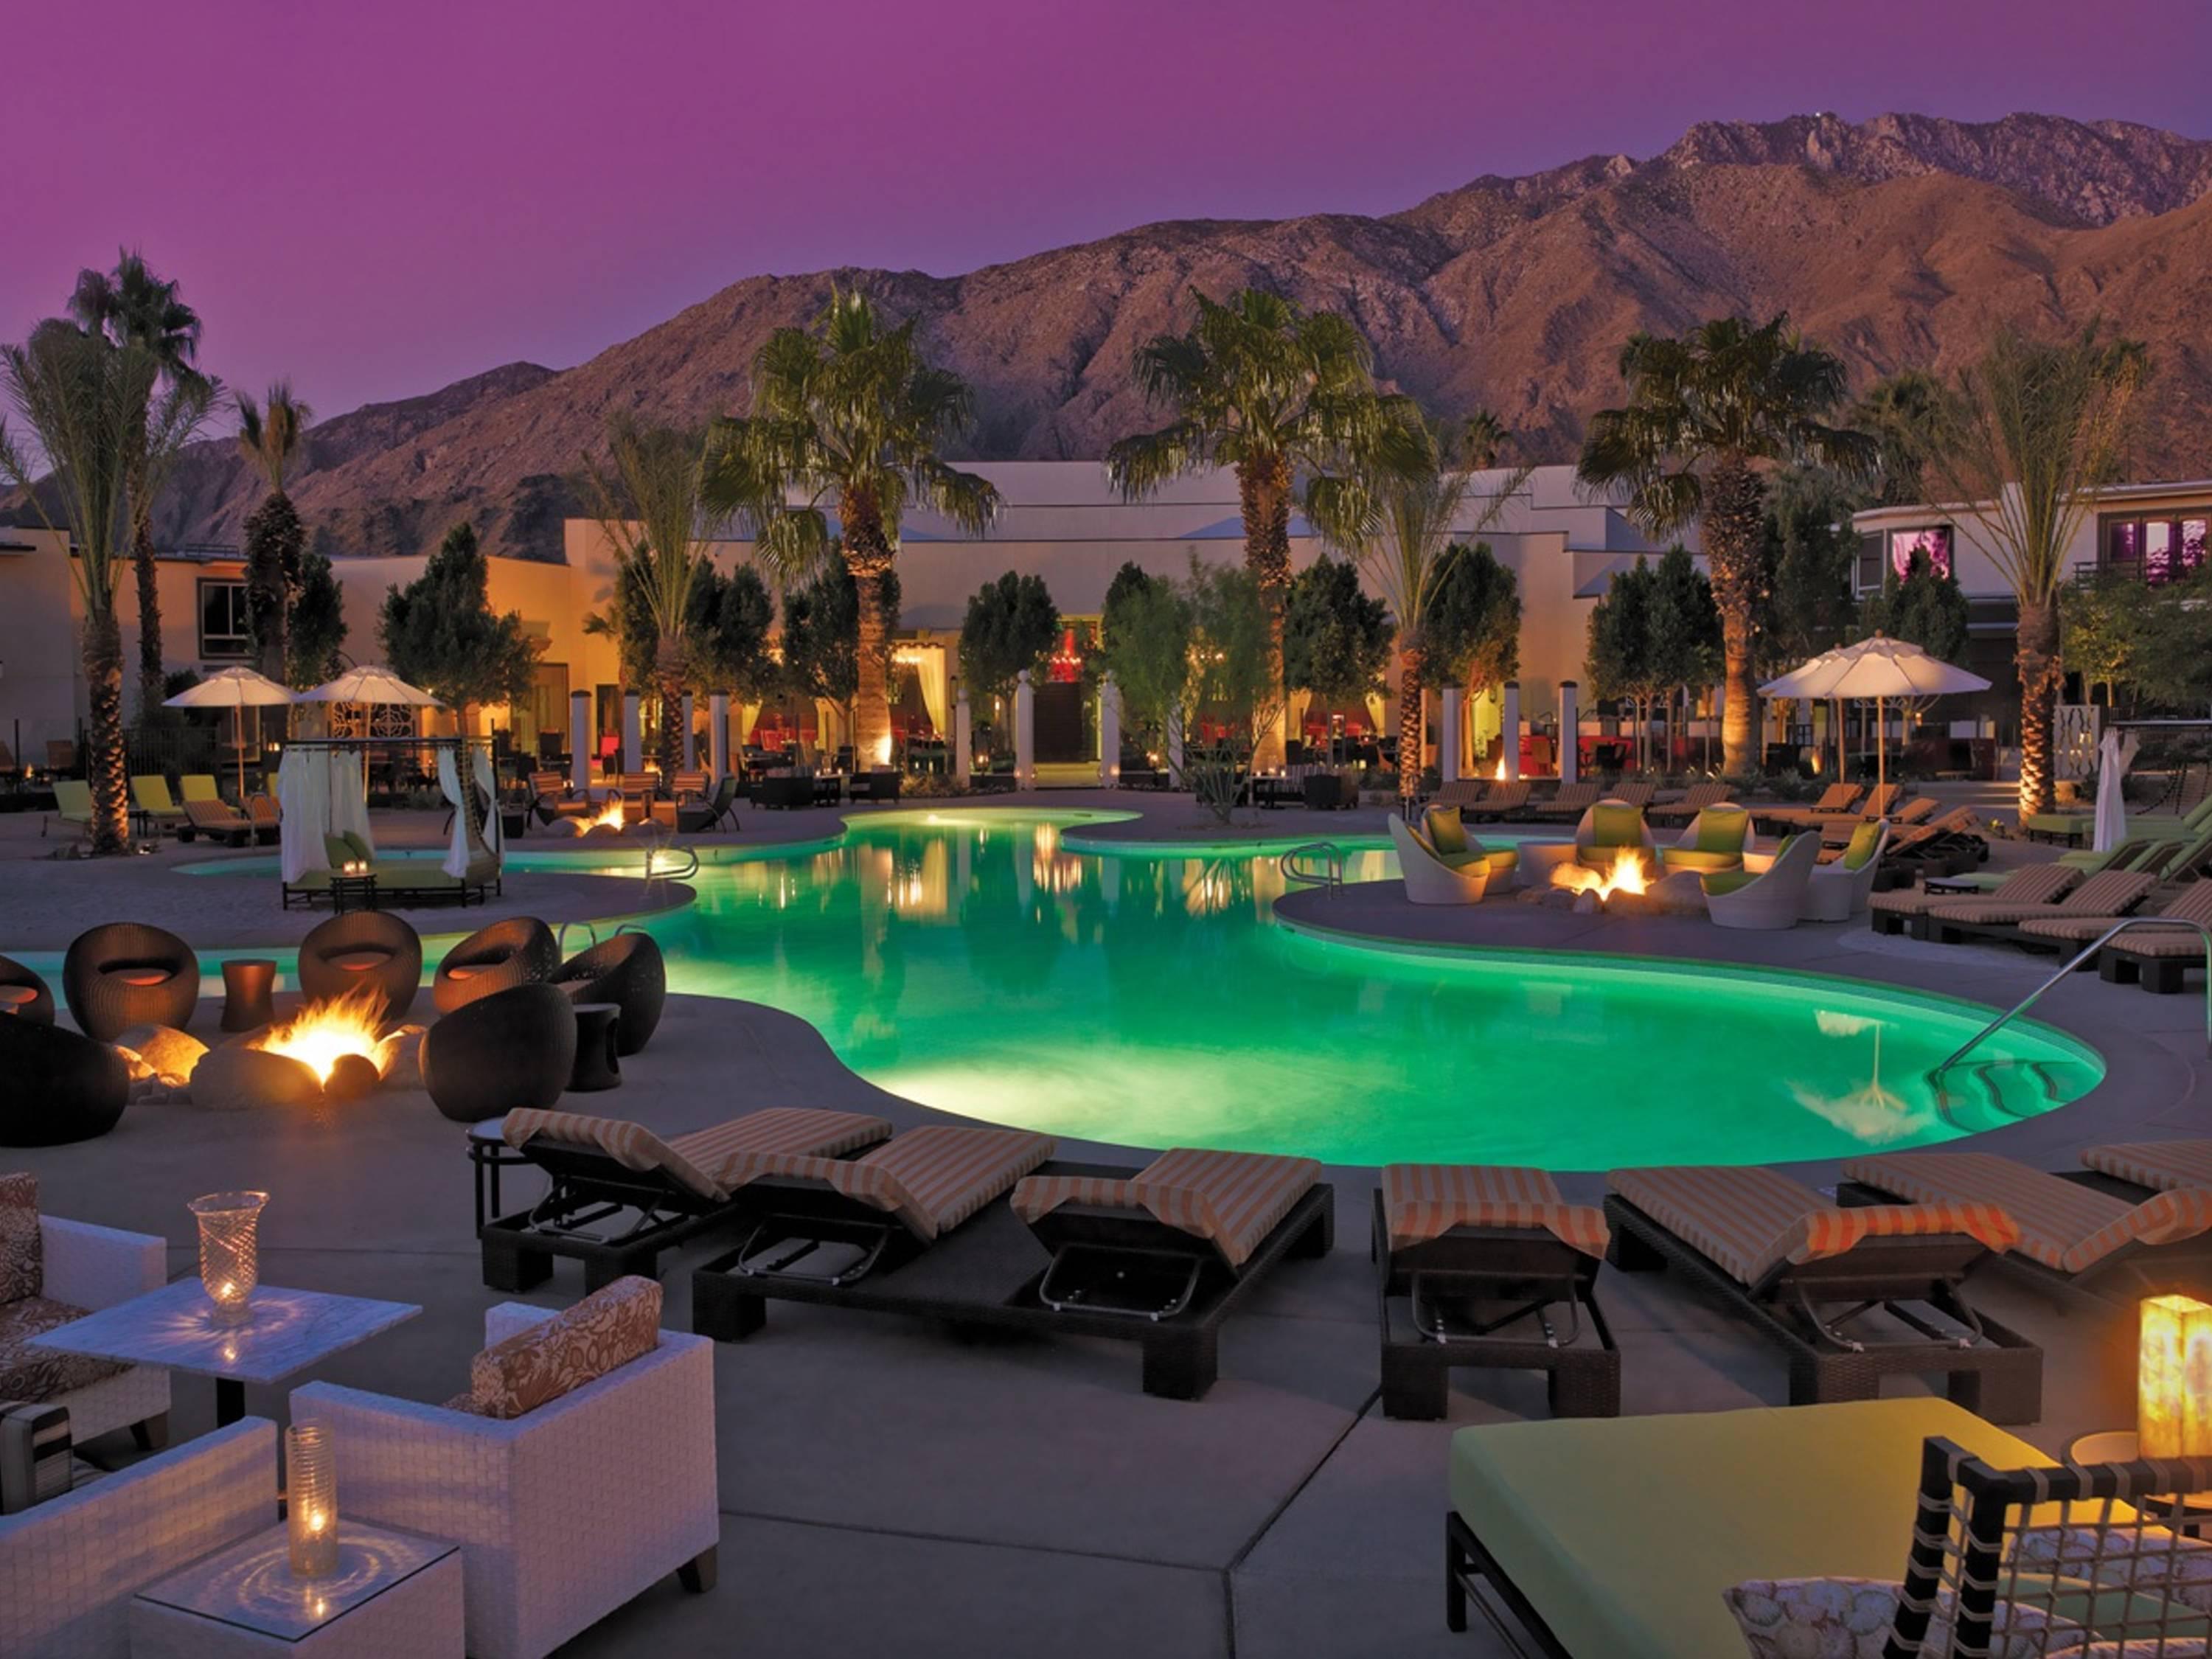 Free download Riviera hotel palm springs modern 118886 High Quality